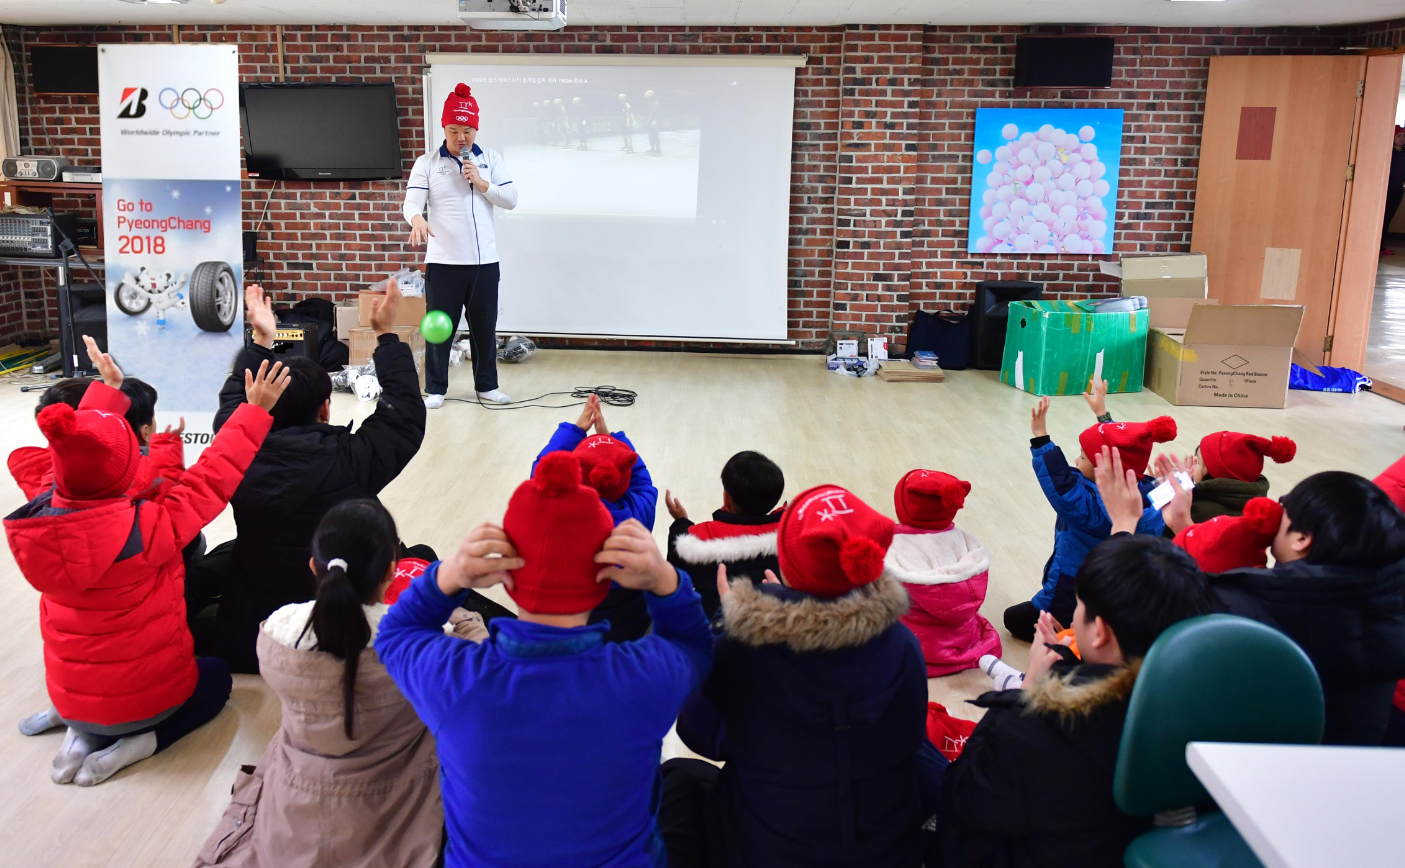 With Bridgestone’s support, the Pyeongchang 2018 Education Programme is now expanding its reach to the children of Shin Mang Won Orphanage in Gyeonggi Province ©Pyeongchang 2018